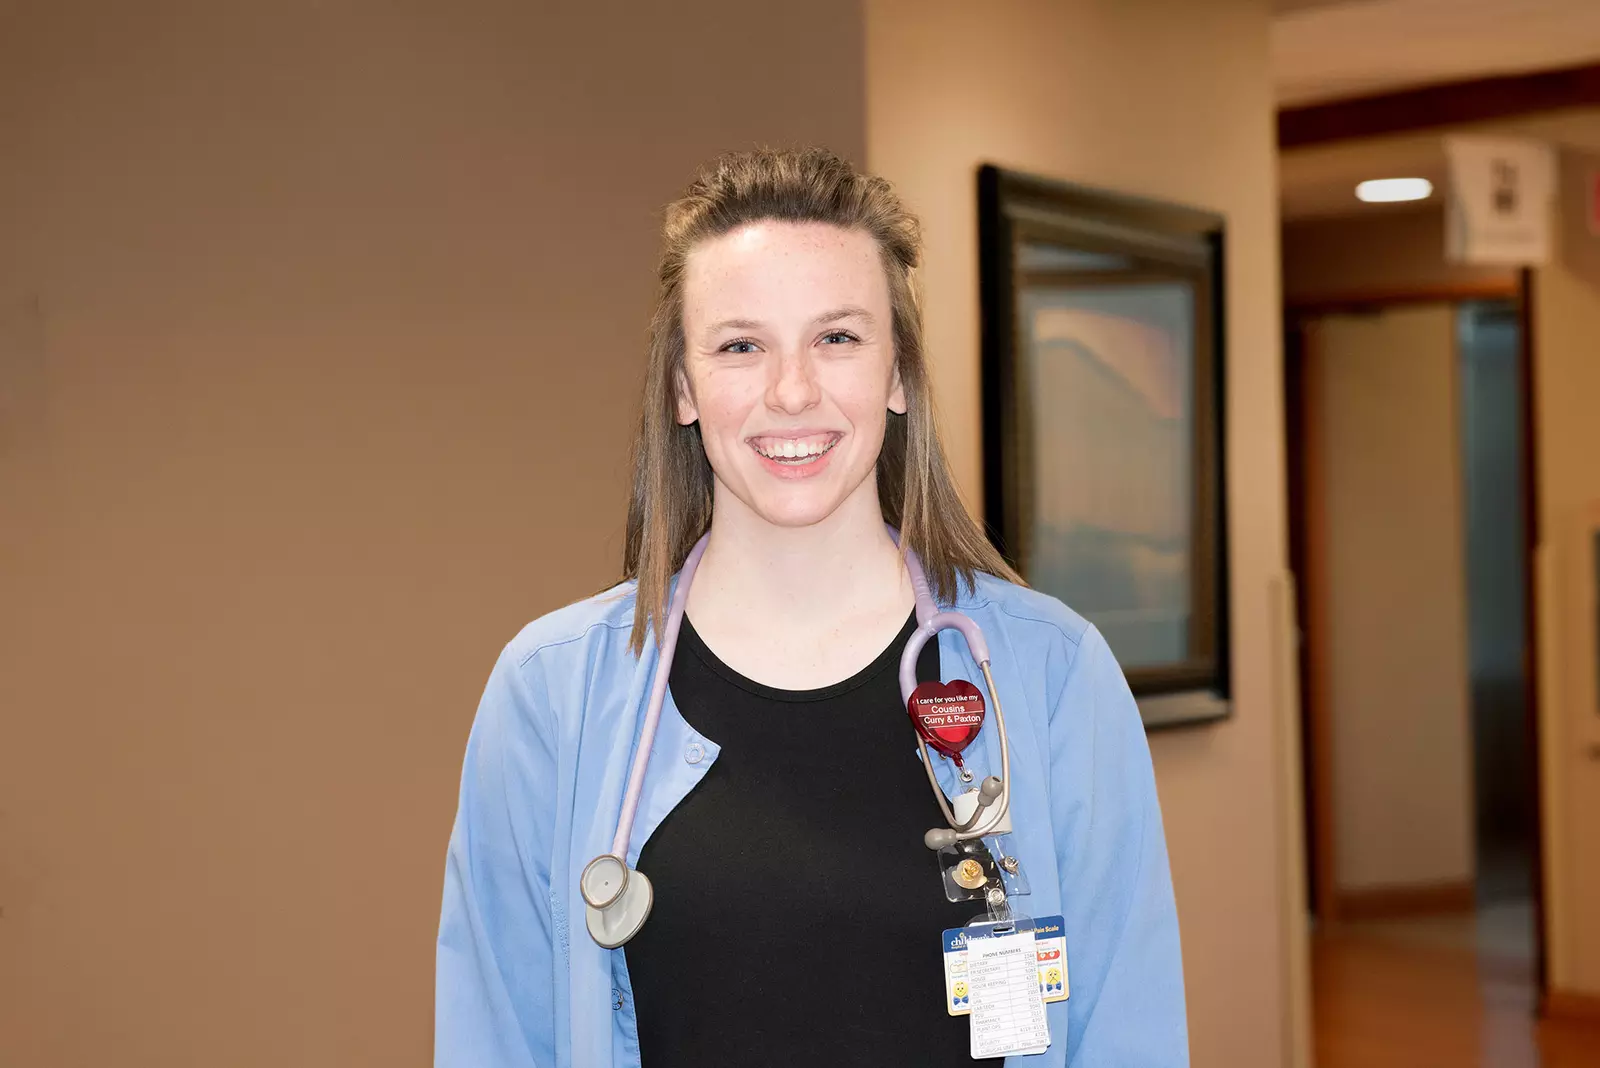 A photo of AdventHealth worker, Gracie Holmes